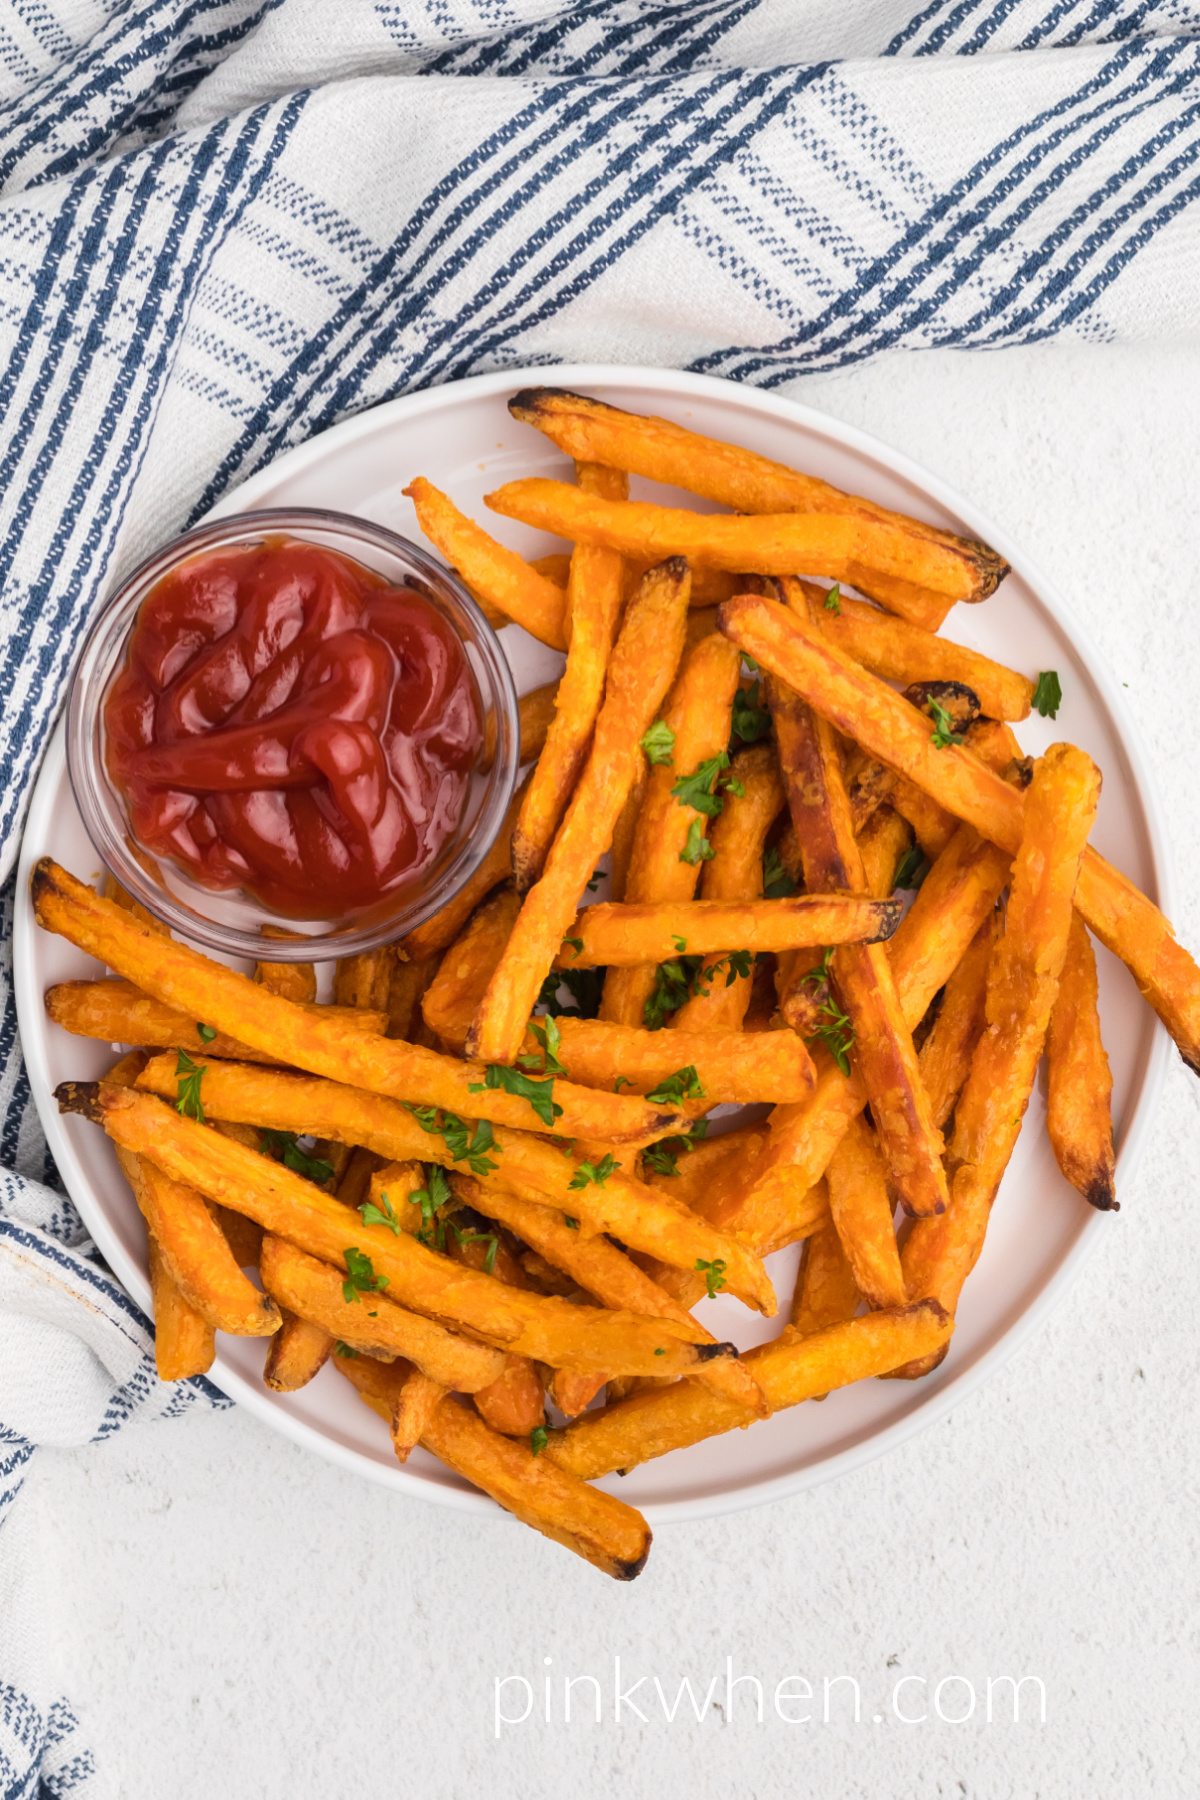 Frozen air fryer sweet potato fries that have been cooked in the air fryer and are on a white plate with a side of ketchup.